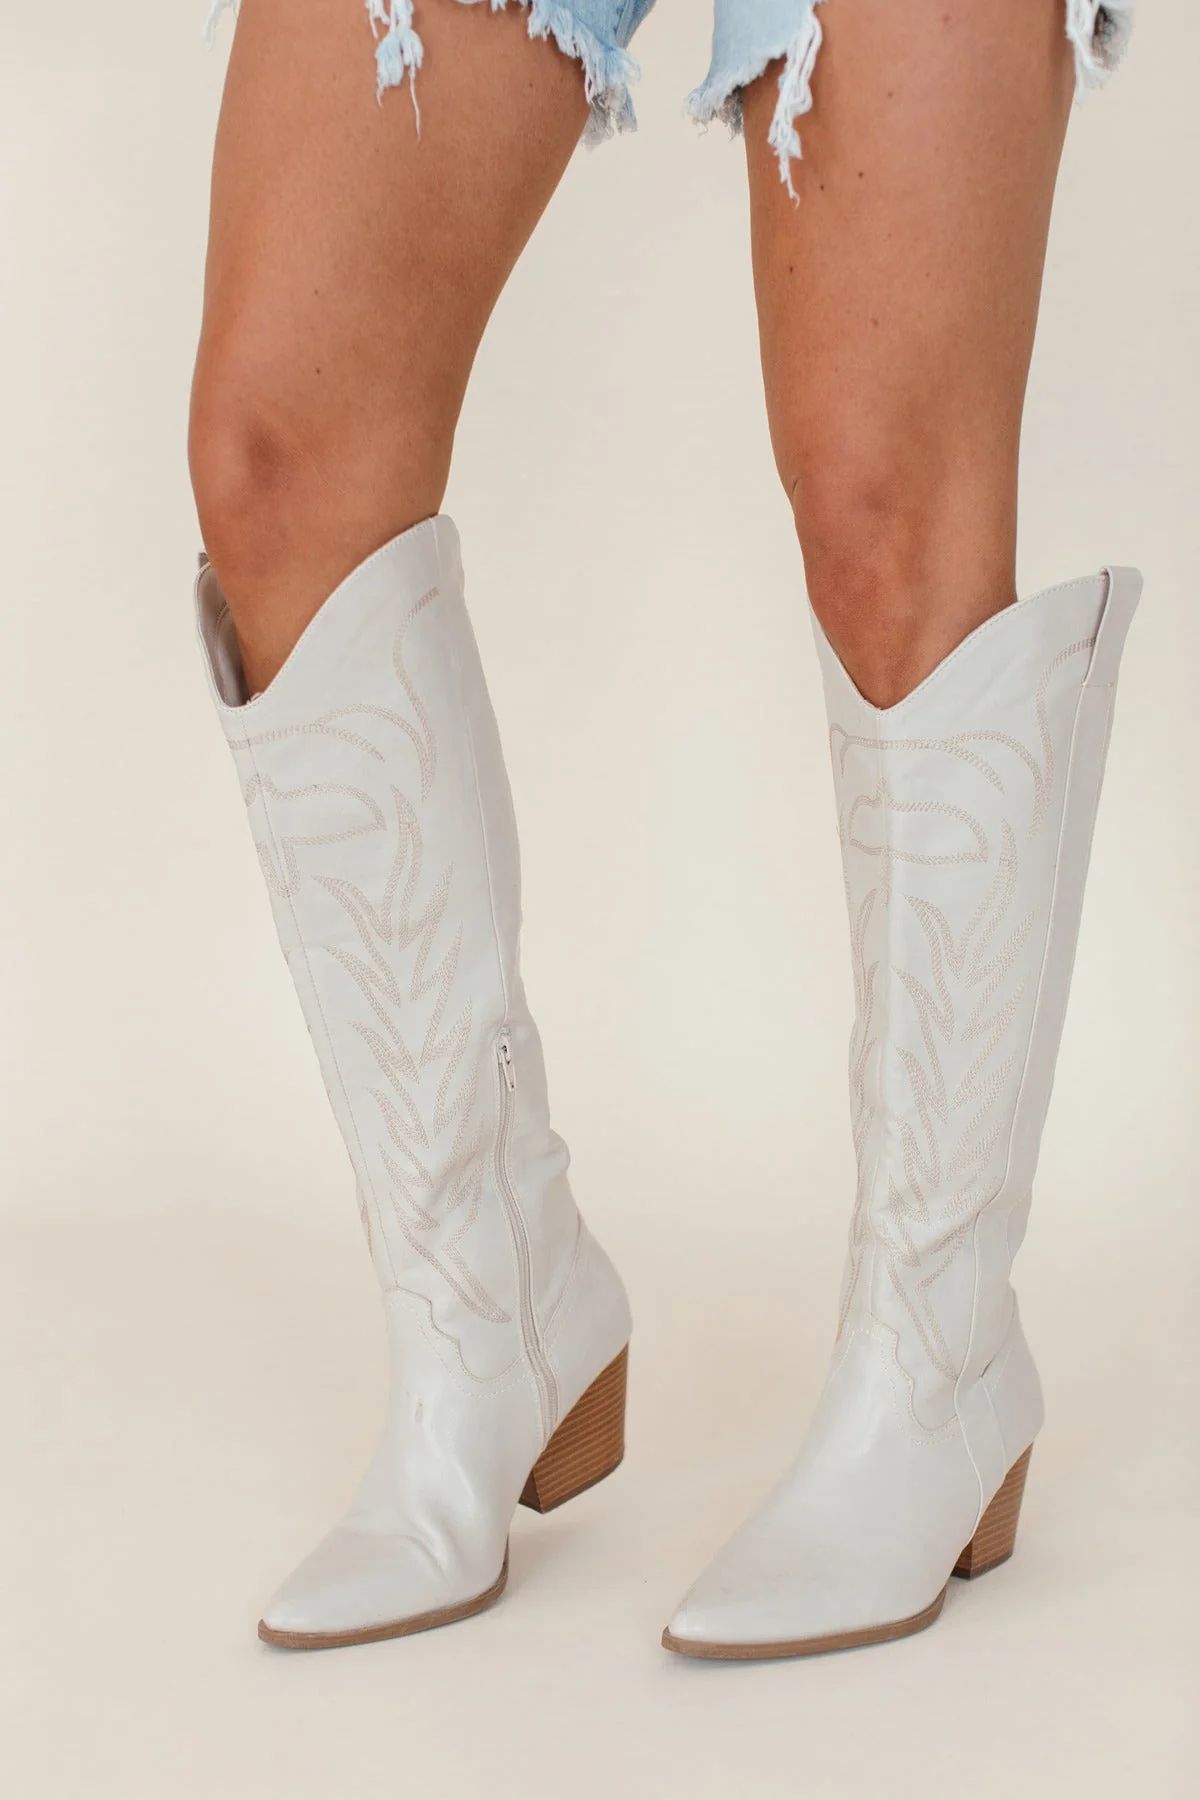 RESTOCK - Postie Western Stone Boots | The Post